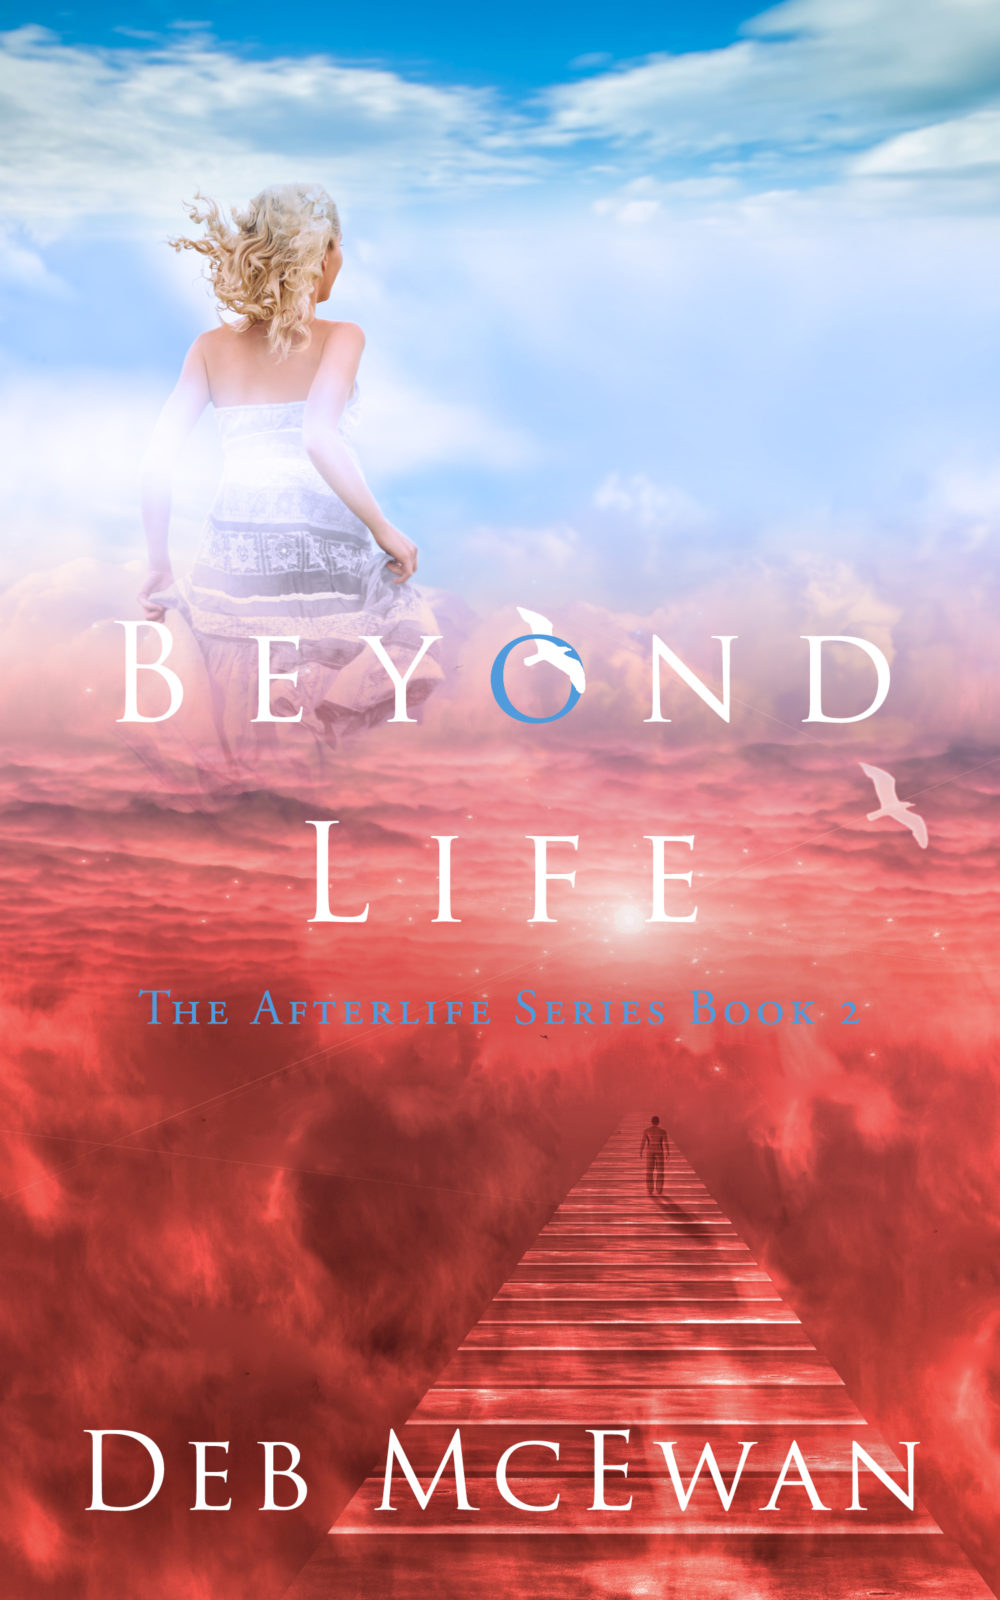 life after life book synopsis